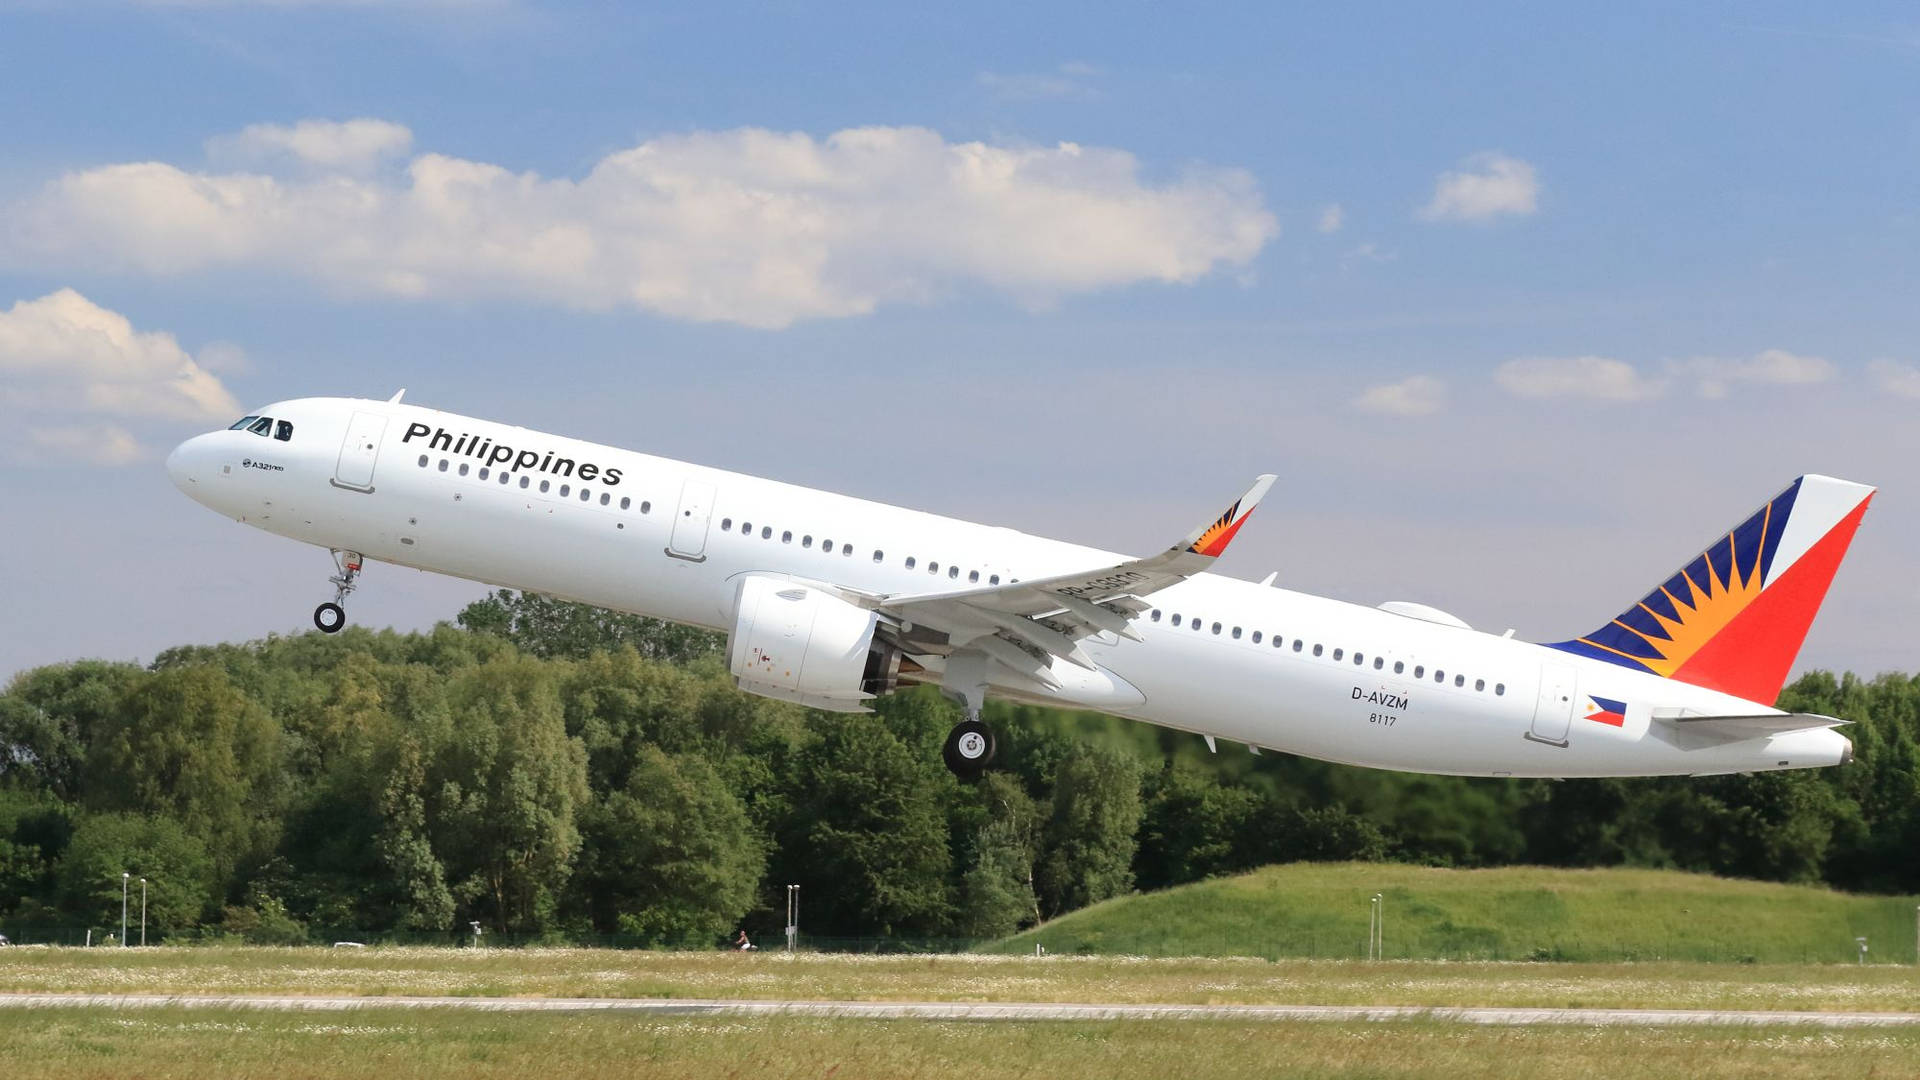 Philippine Airlines Craft Poised on Grass Field Wallpaper